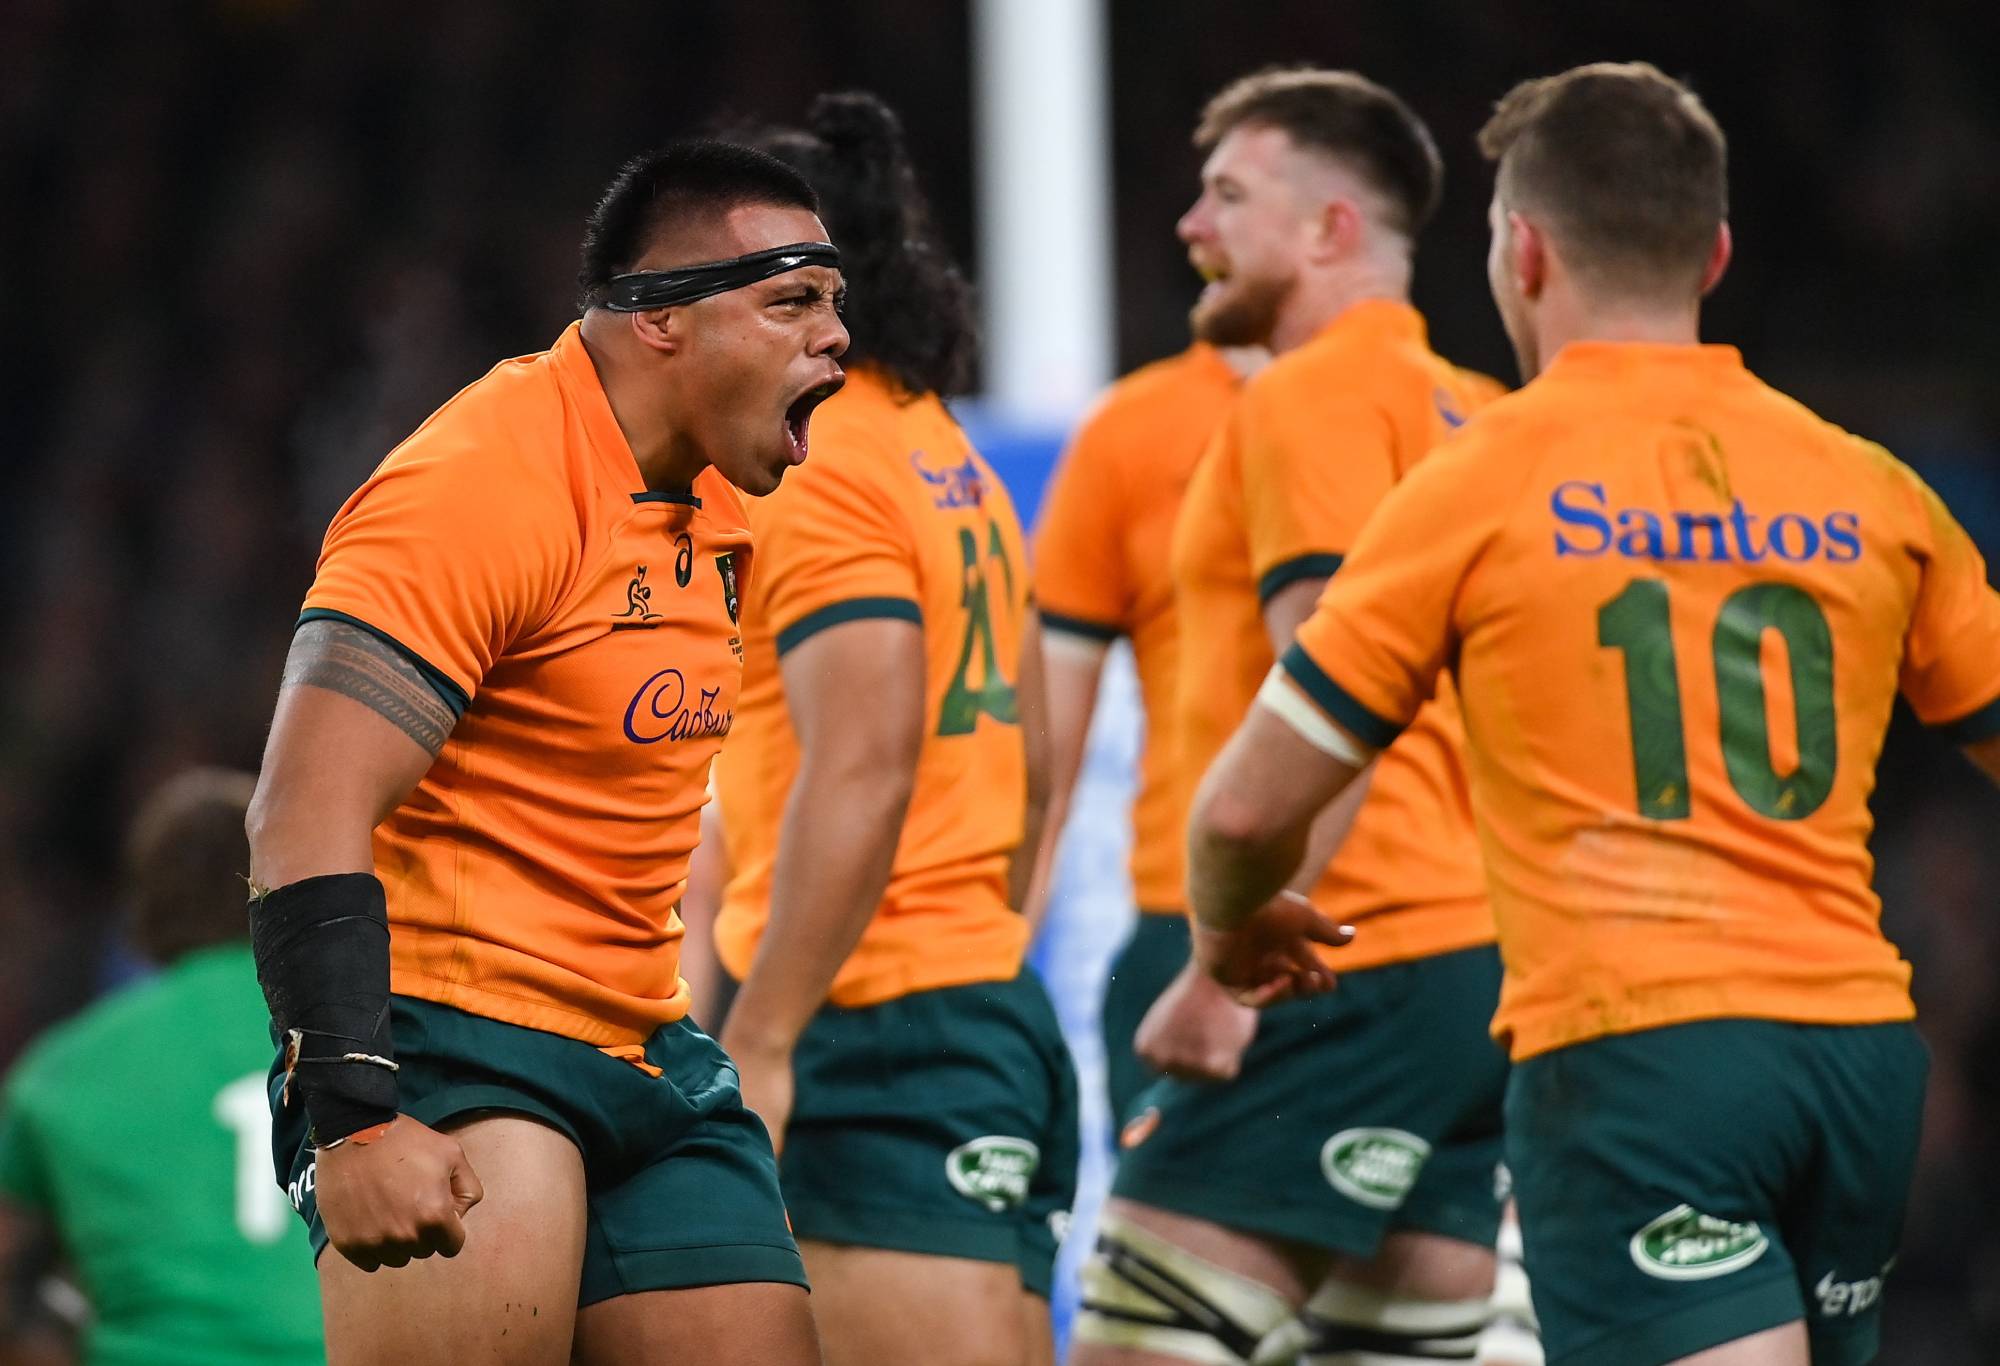 Allan Ala'alatoa of Australia celebrates his side winning a penalty during the Bank of Ireland Nations Series match between Ireland and Australia at the Aviva Stadium in Dublin. (Photo By Ramsey Cardy/Sportsfile via Getty Images)